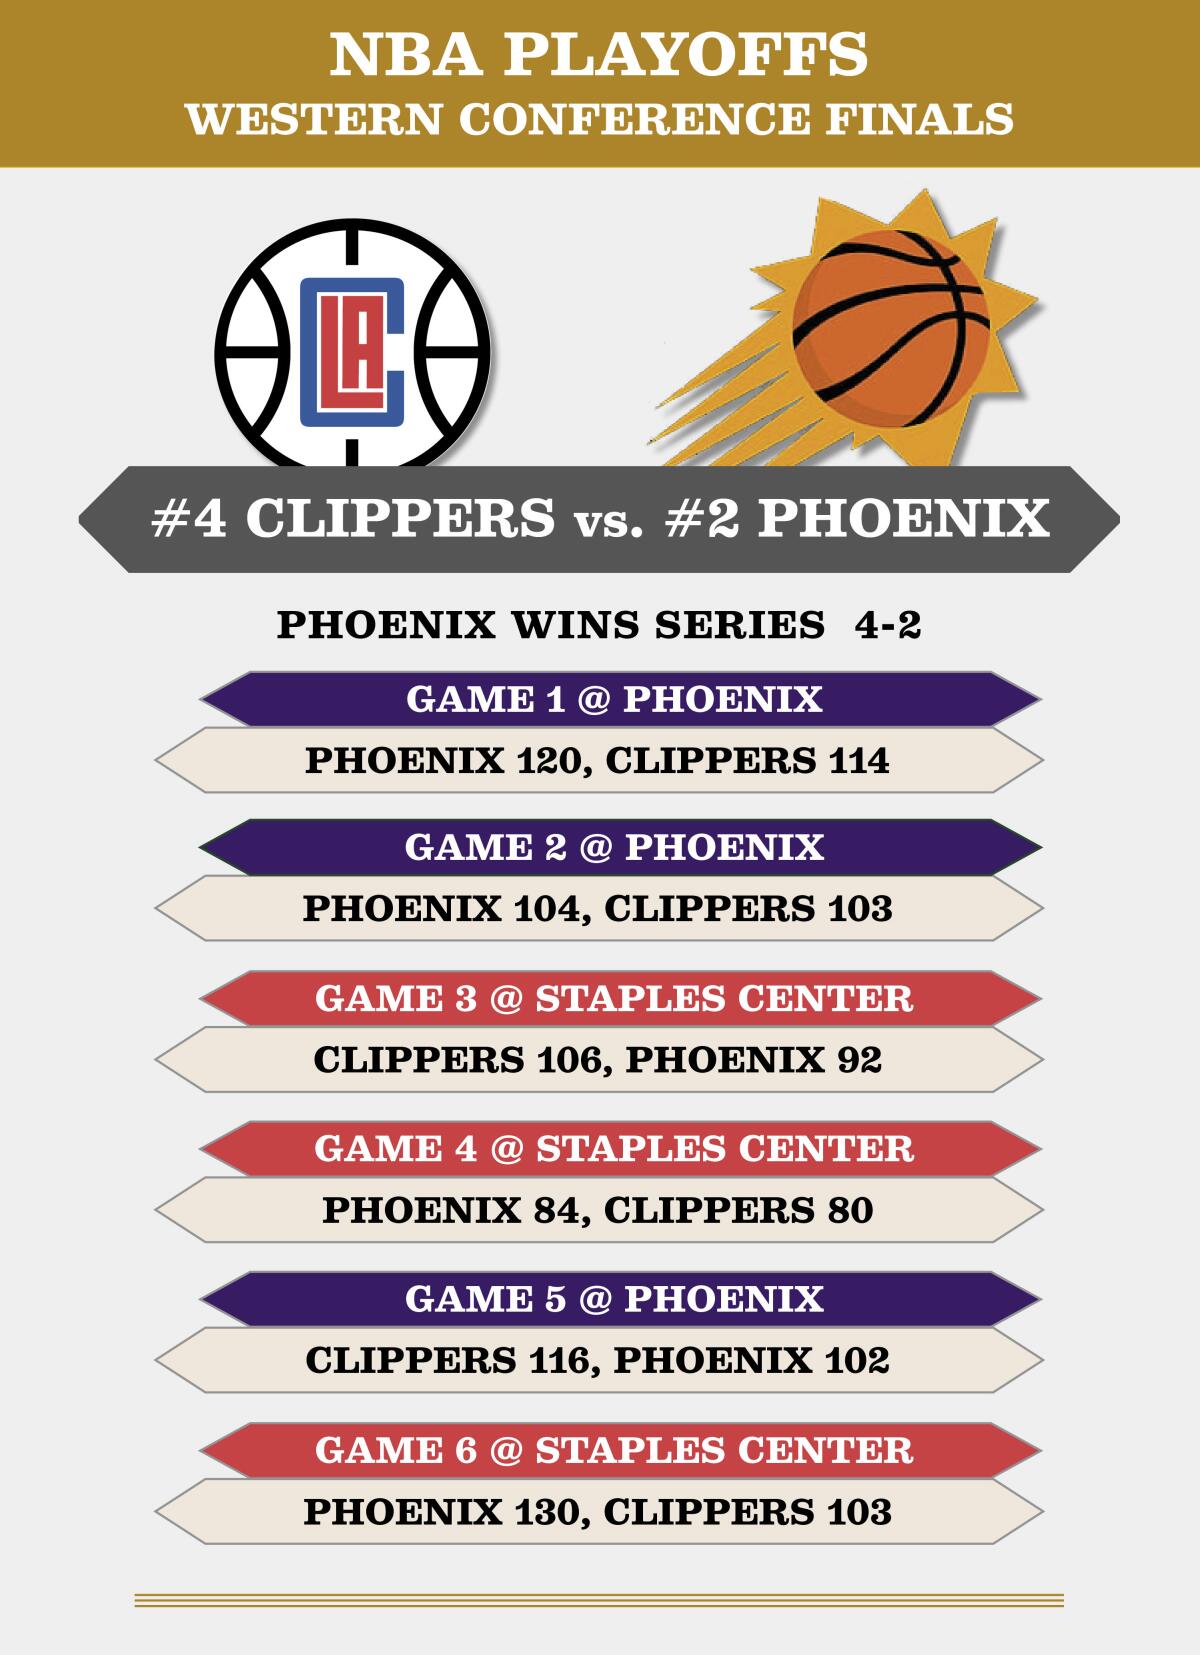 Clippers series vs. Suns